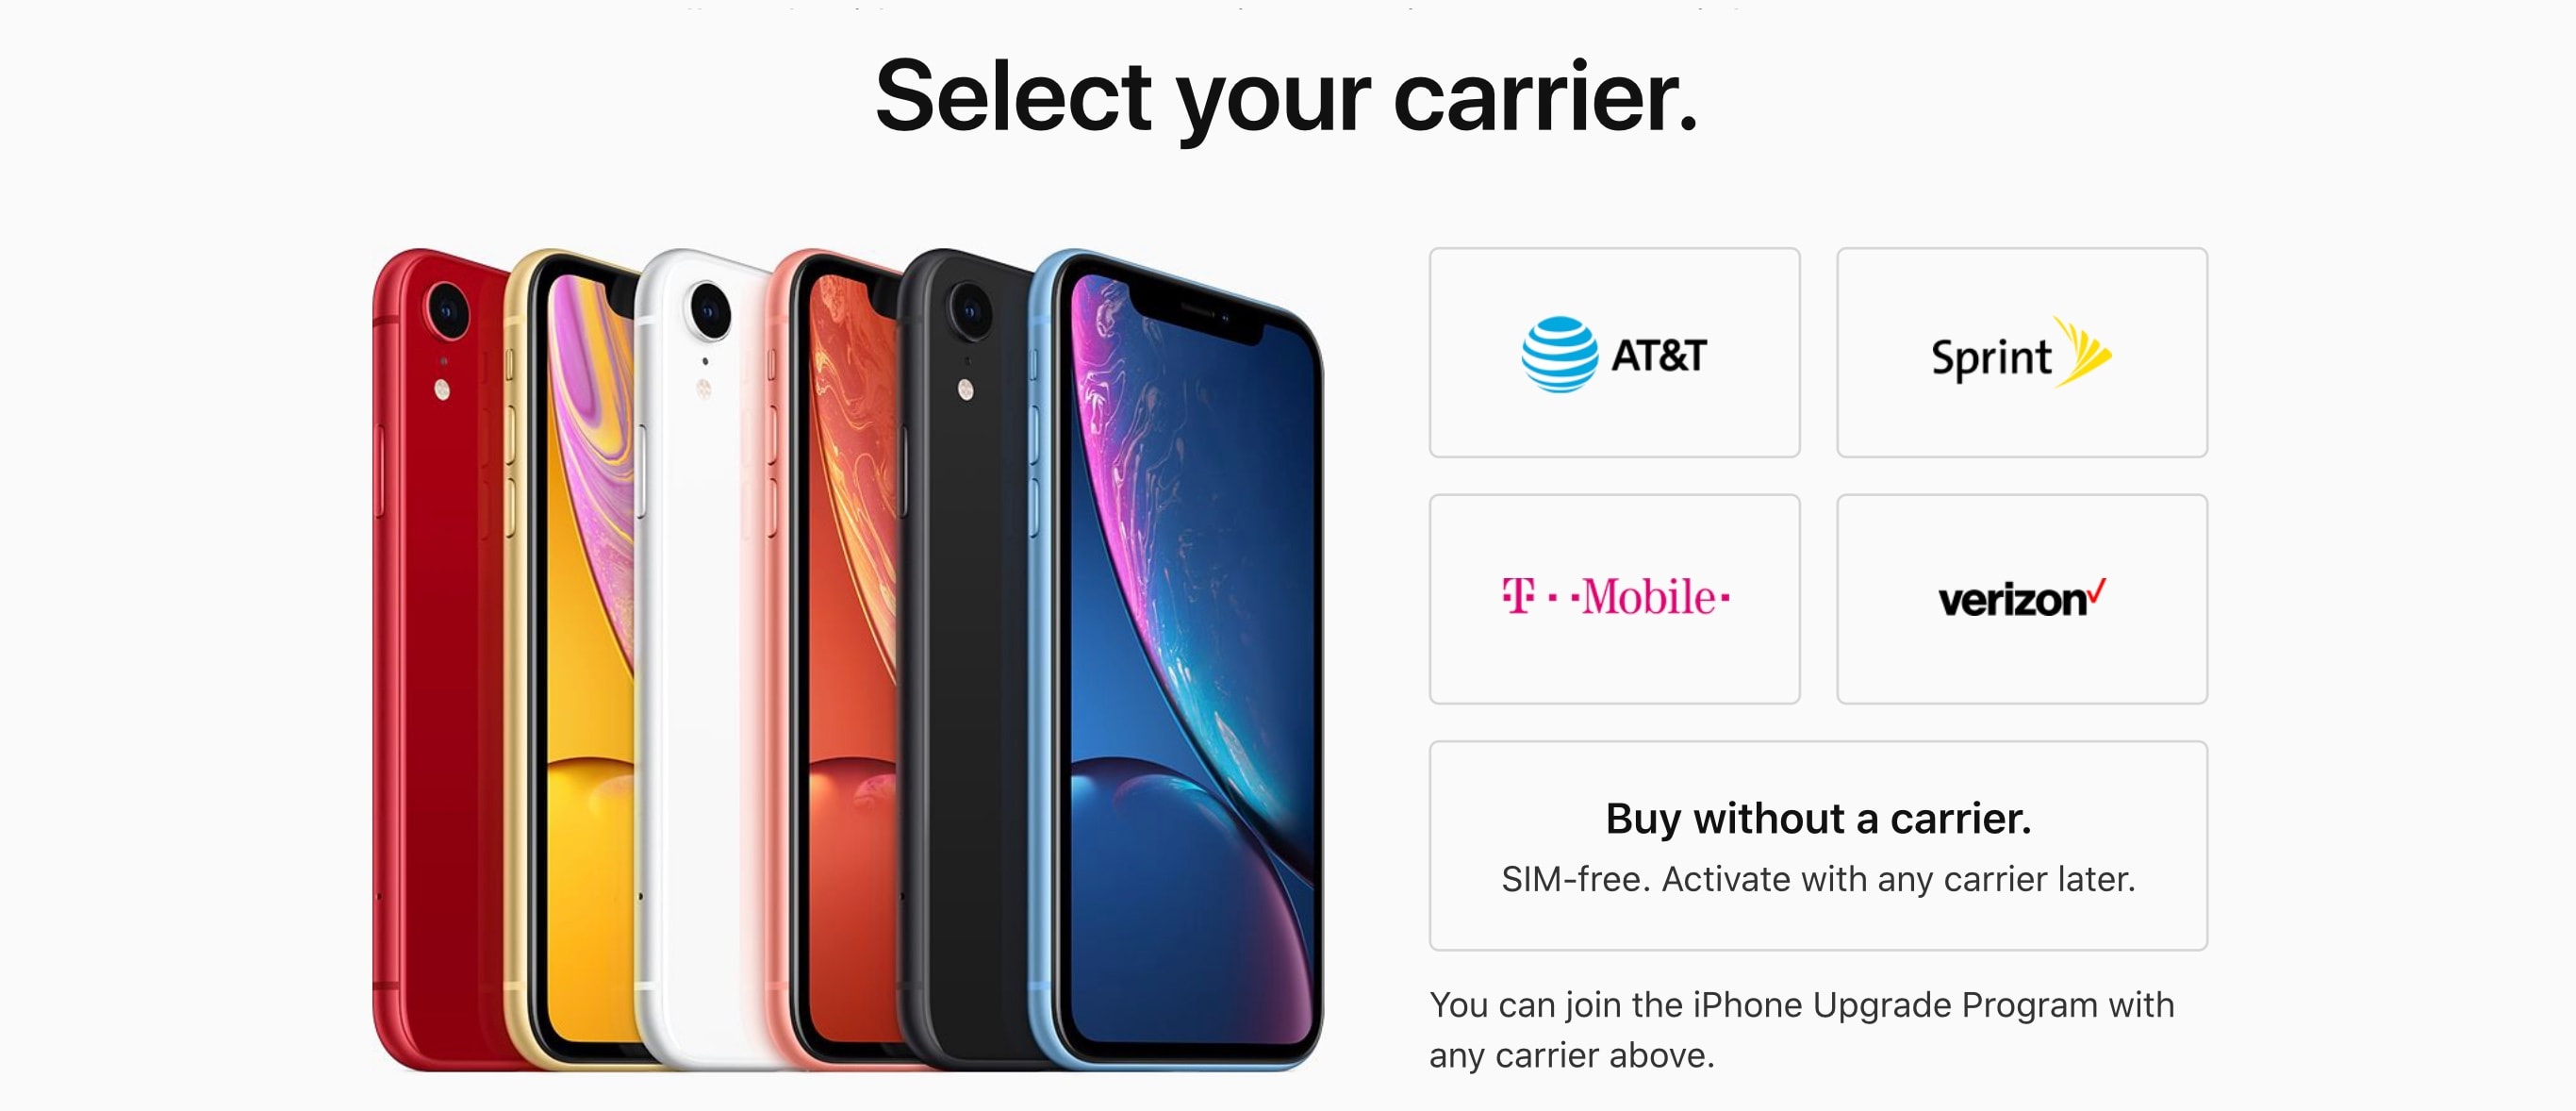 CHoose an unlocked iPhone XR if you’re giving it as a gift.